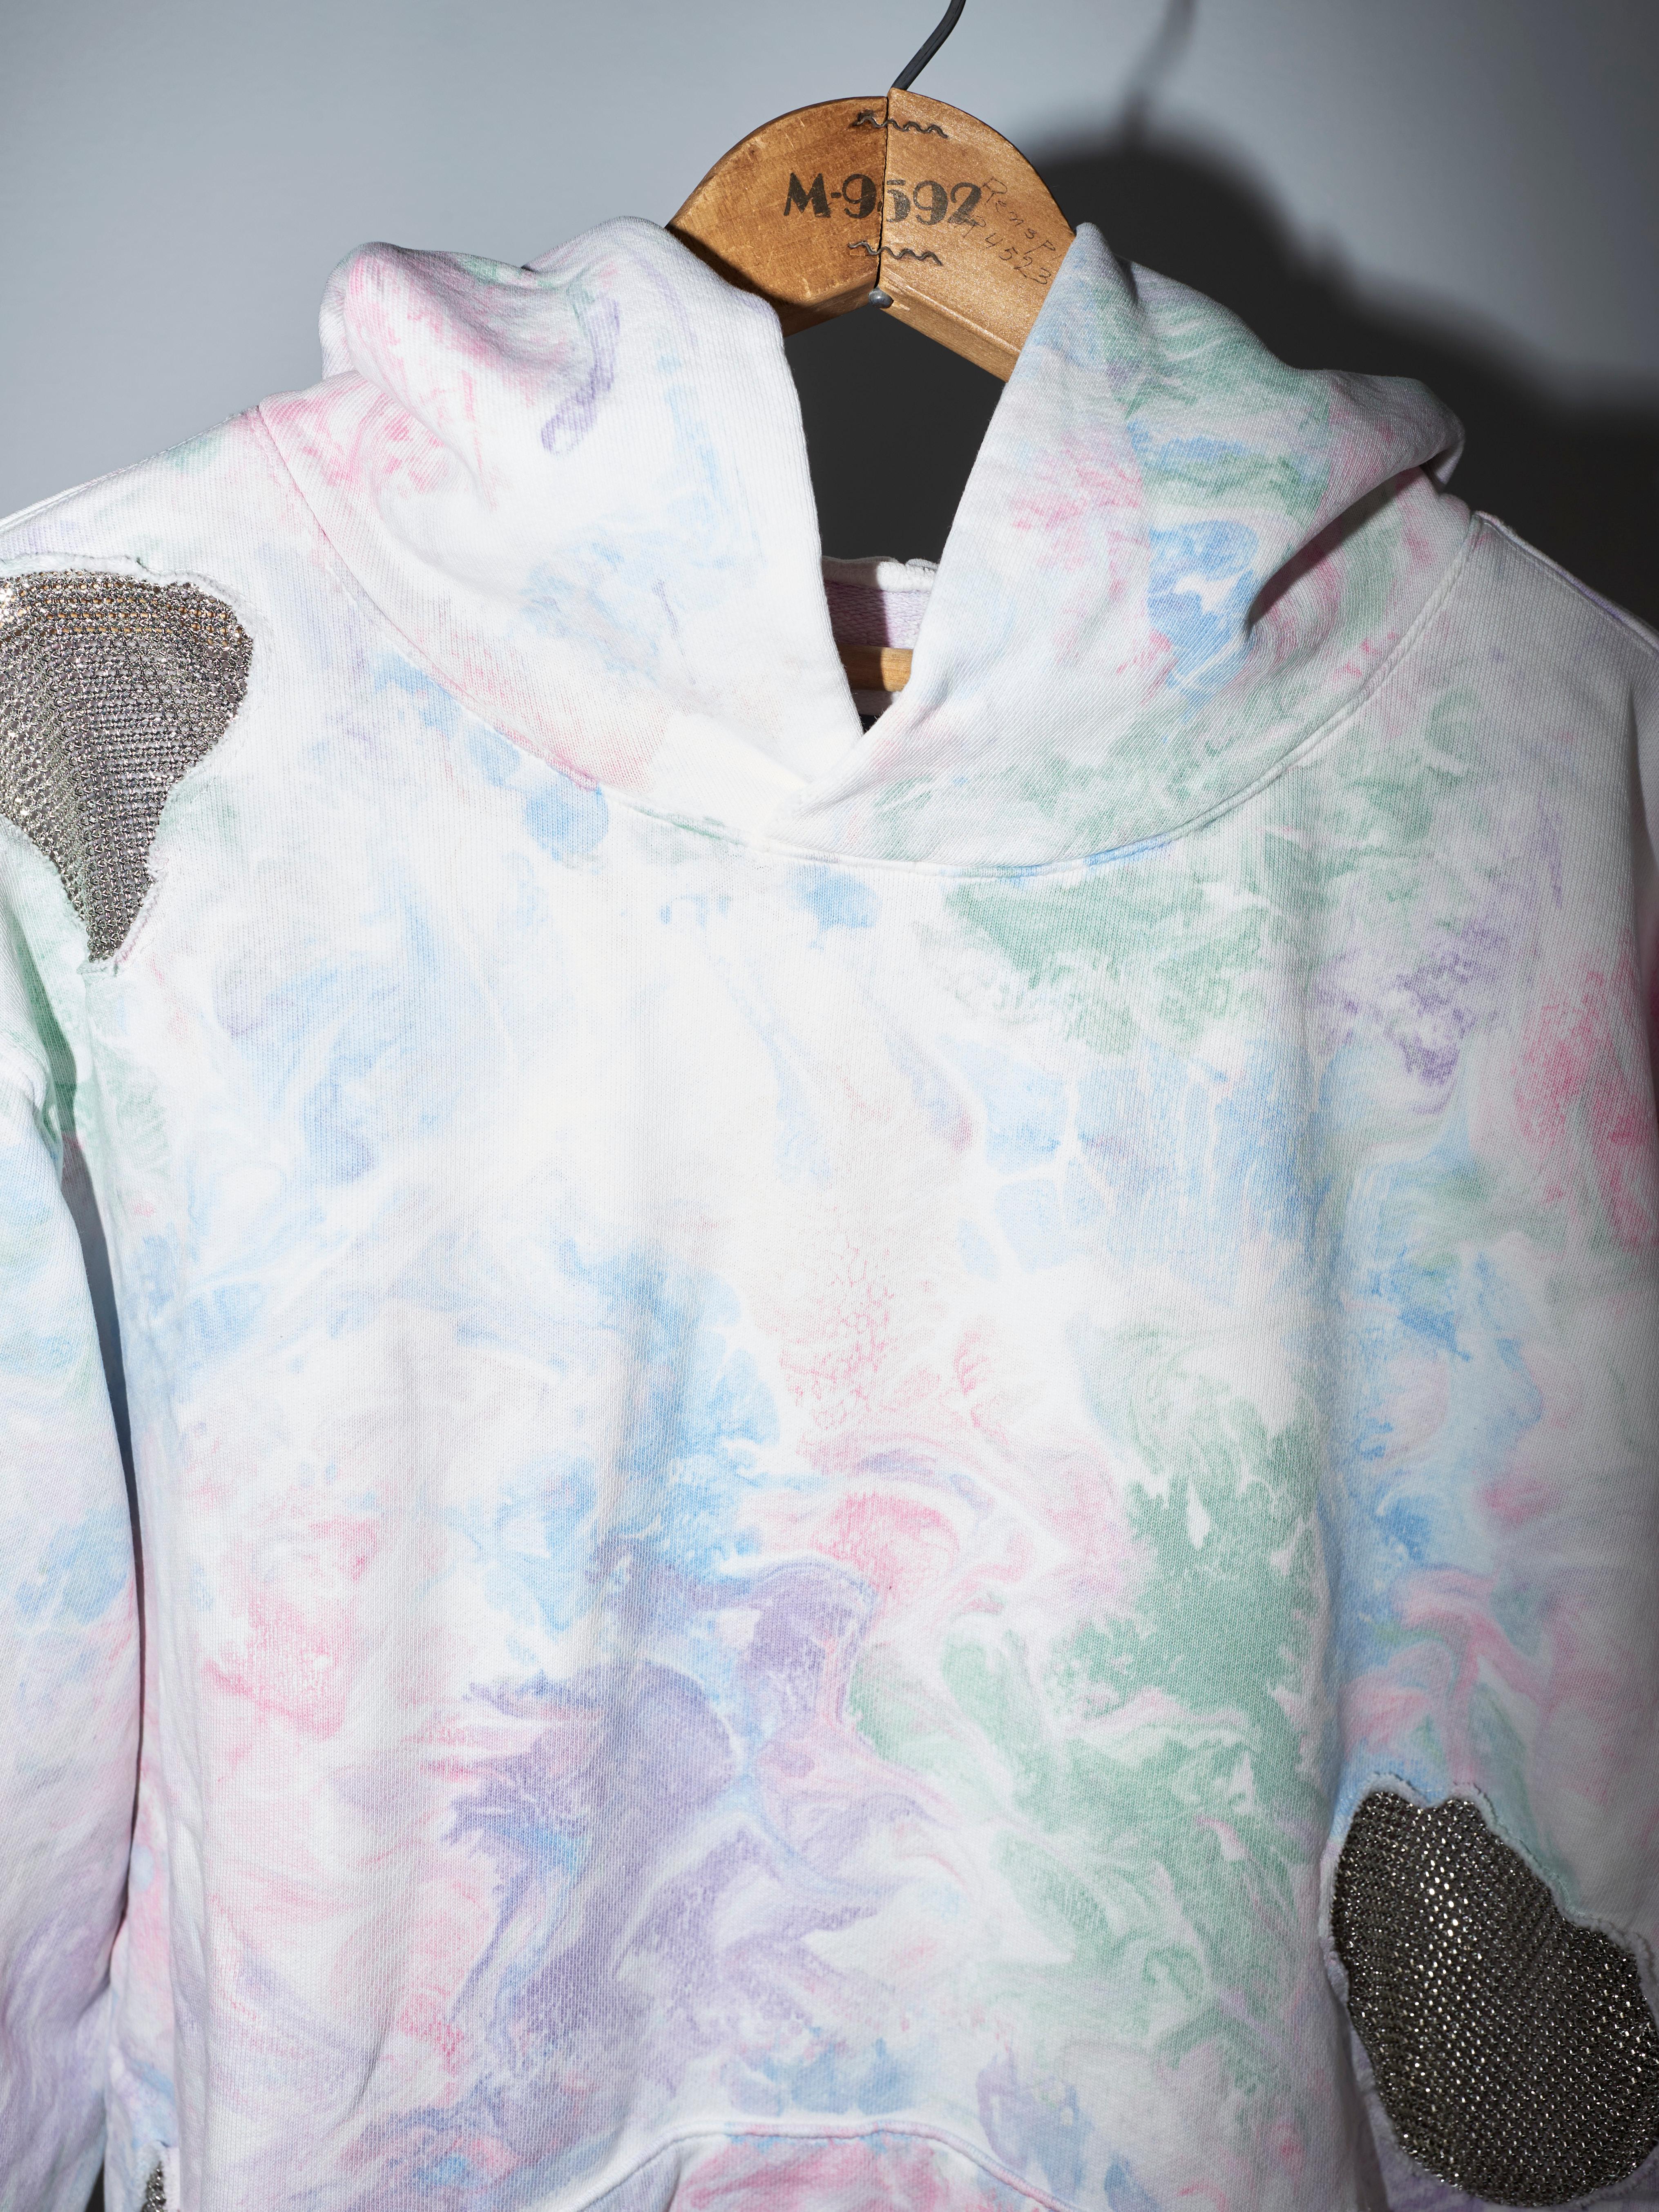 Hoodie Pastel Marble Cotton Embellished Chain Patchwork J Dauphin For Sale 3